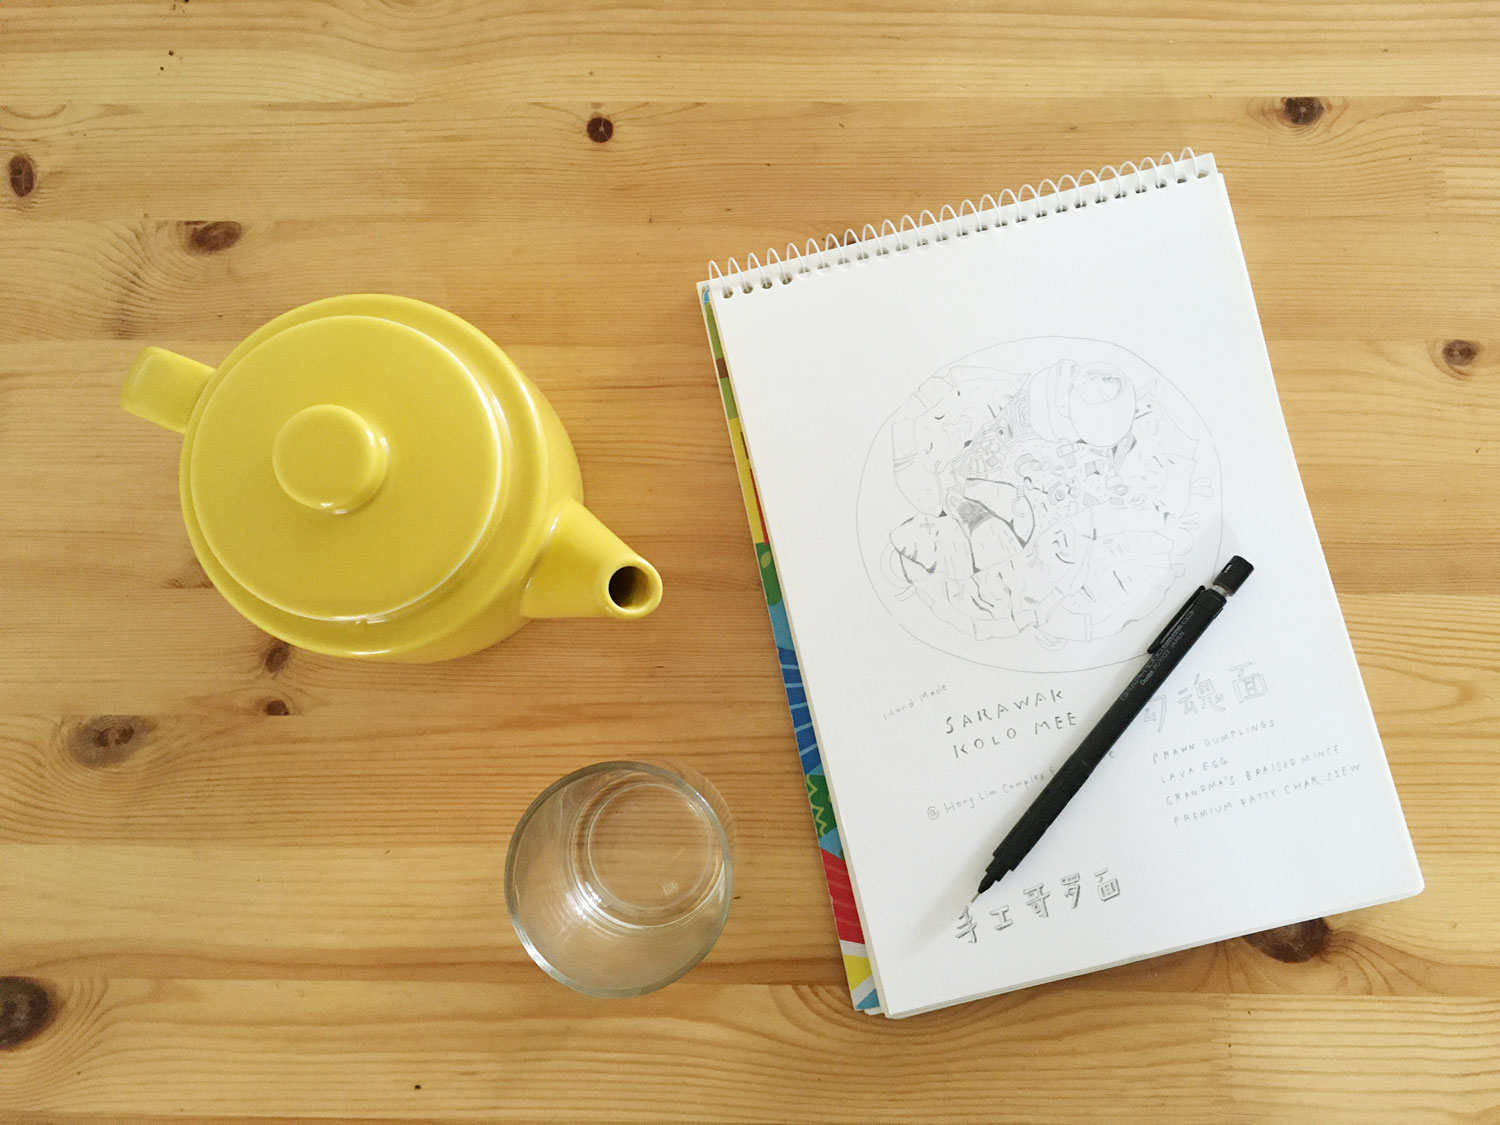 A sketch book resting on a table with a pot of tea.